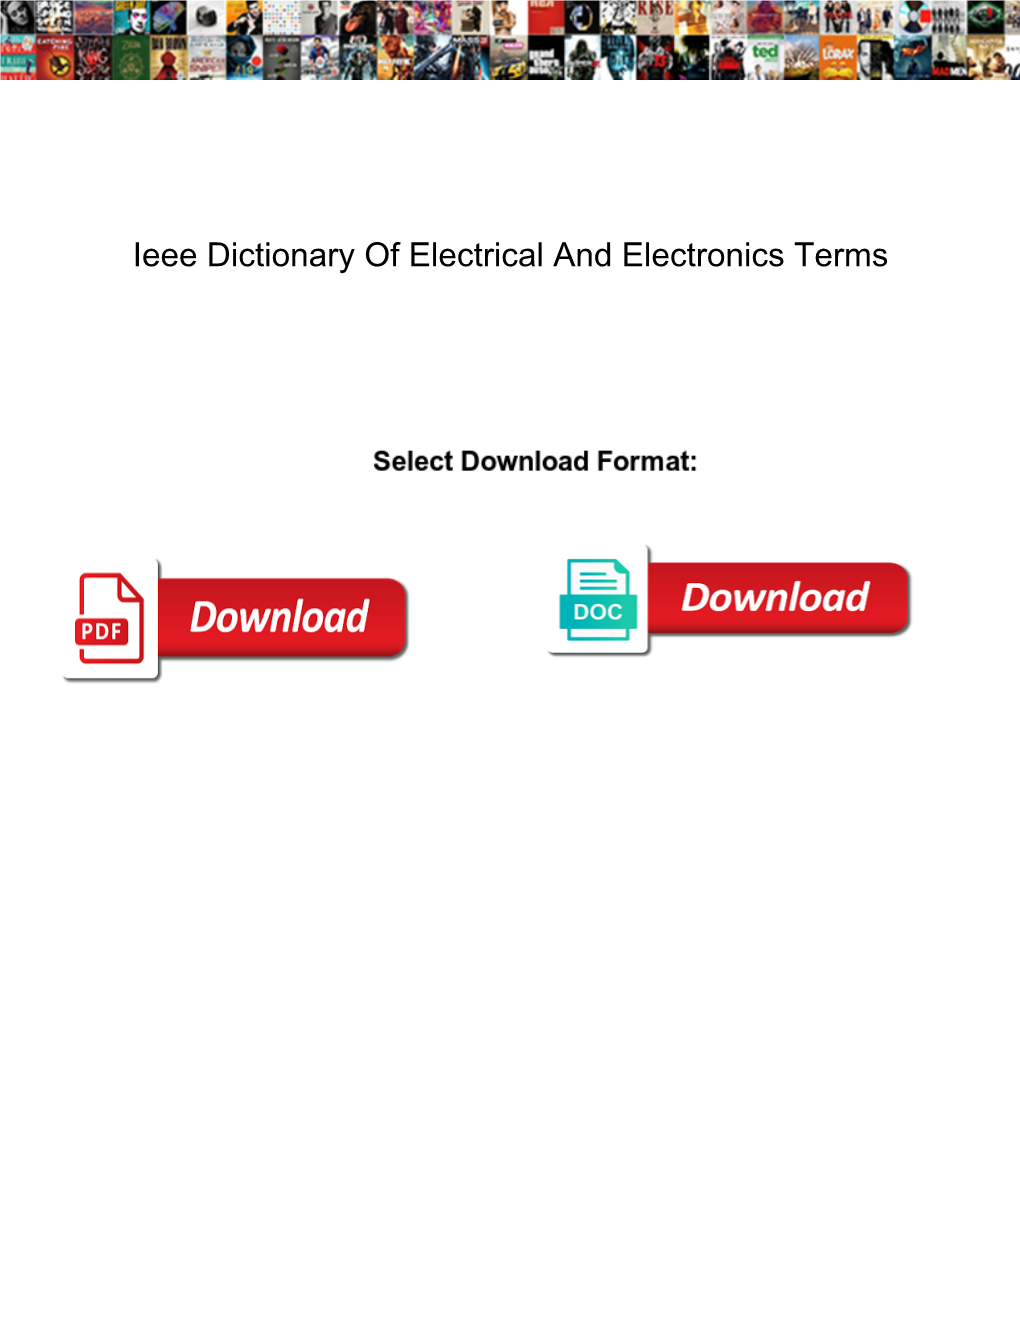 Ieee Dictionary of Electrical and Electronics Terms